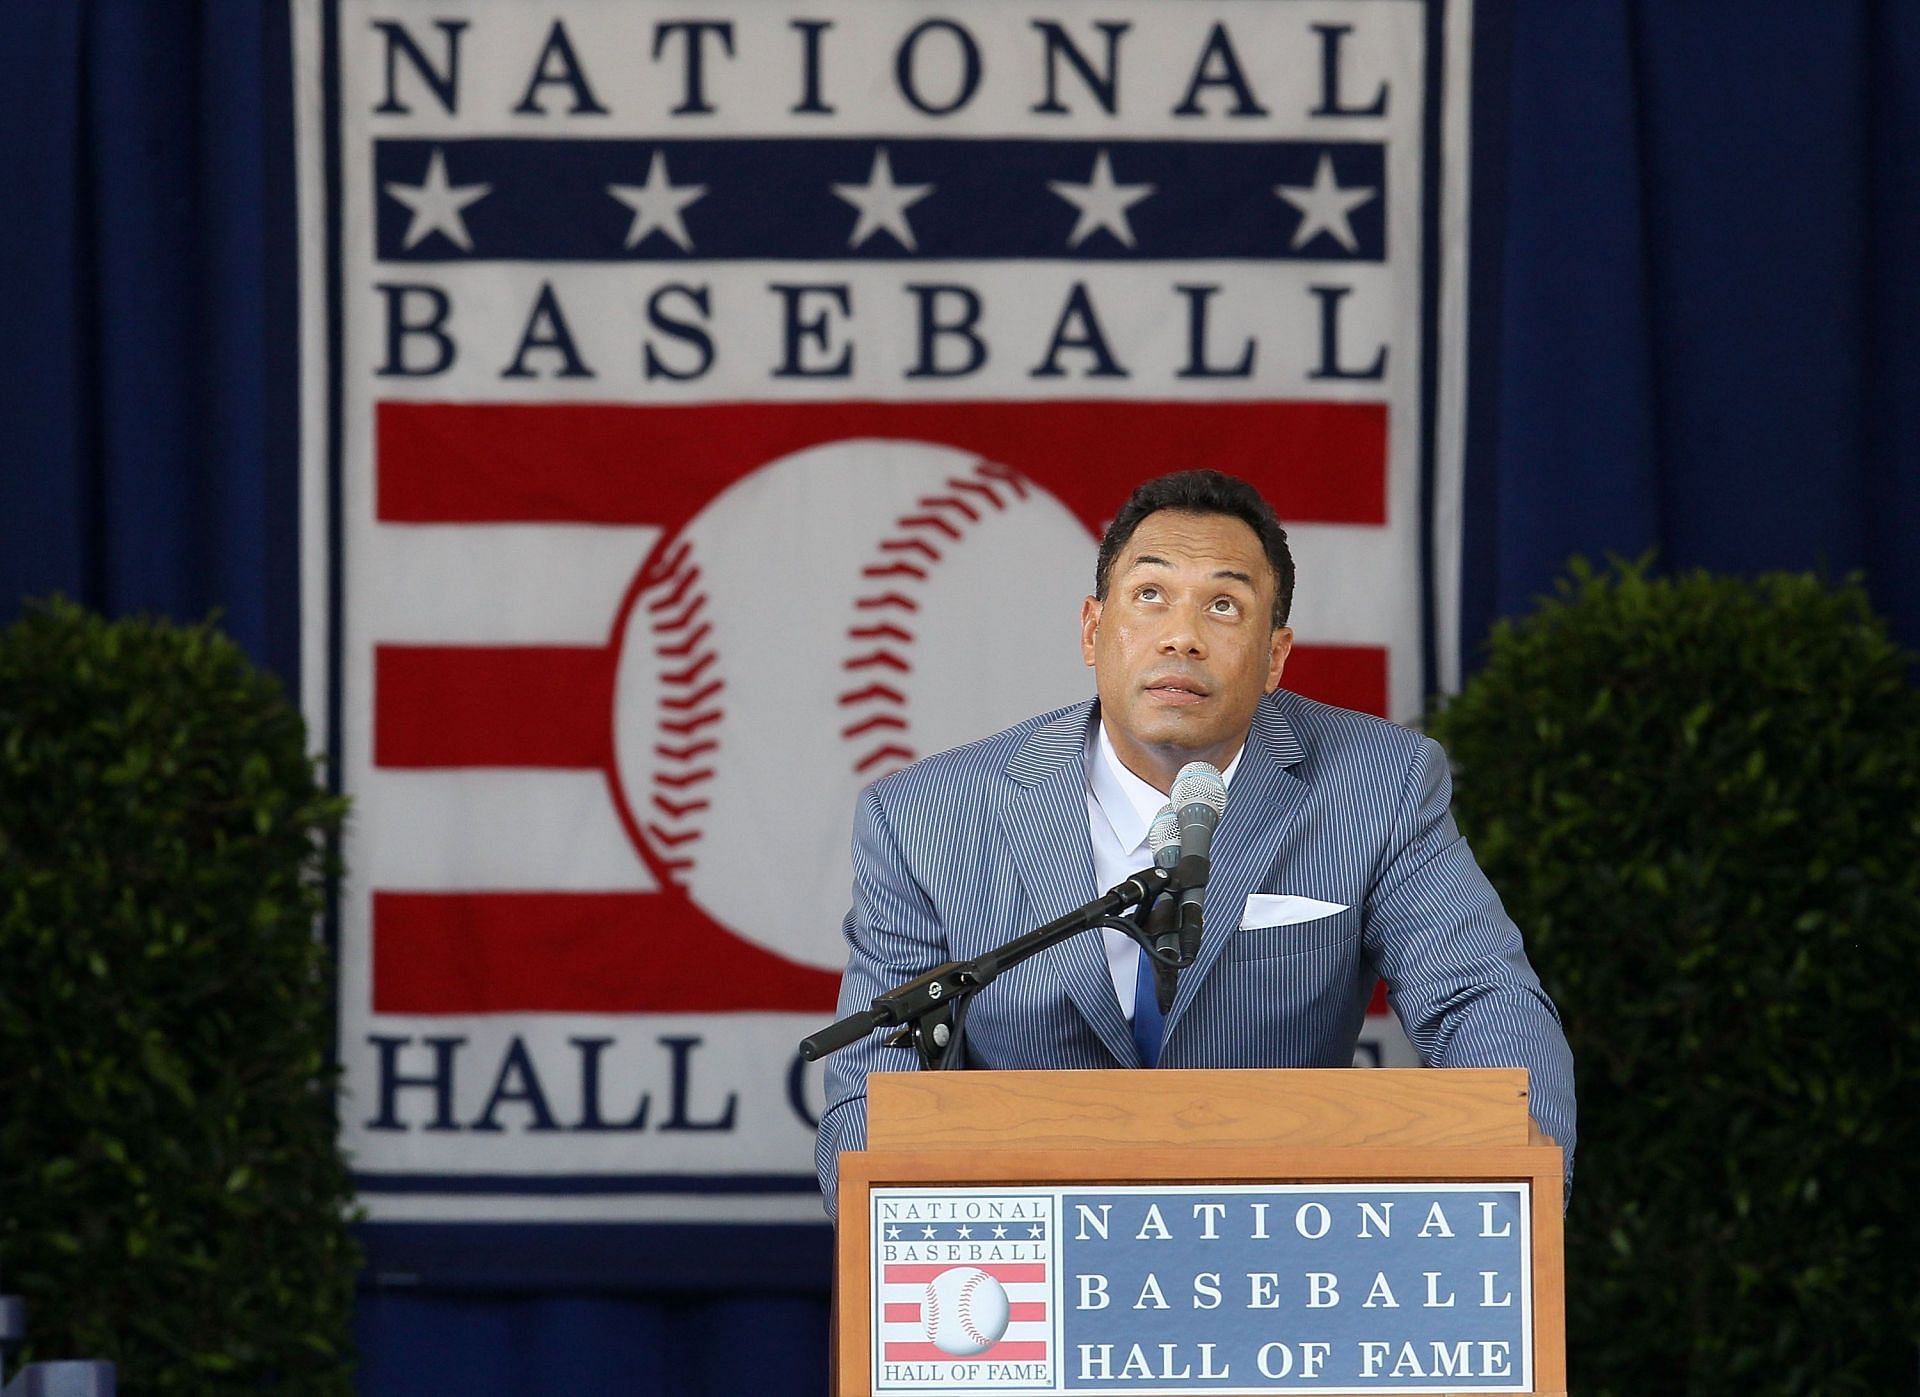 Roberto Alomar gives his speech at Clark Sports Center during the Baseball Hall of Fame induction ceremony on July 24, 2011 in Cooperstown, New York. In 17 major league seasons, Alomar tallied 2,724 hits, 210 home runs, 1,134 RBI, a .984 fielding percentage, and a .300 batting average. (Photo by Jim McIsaac/Getty Images)